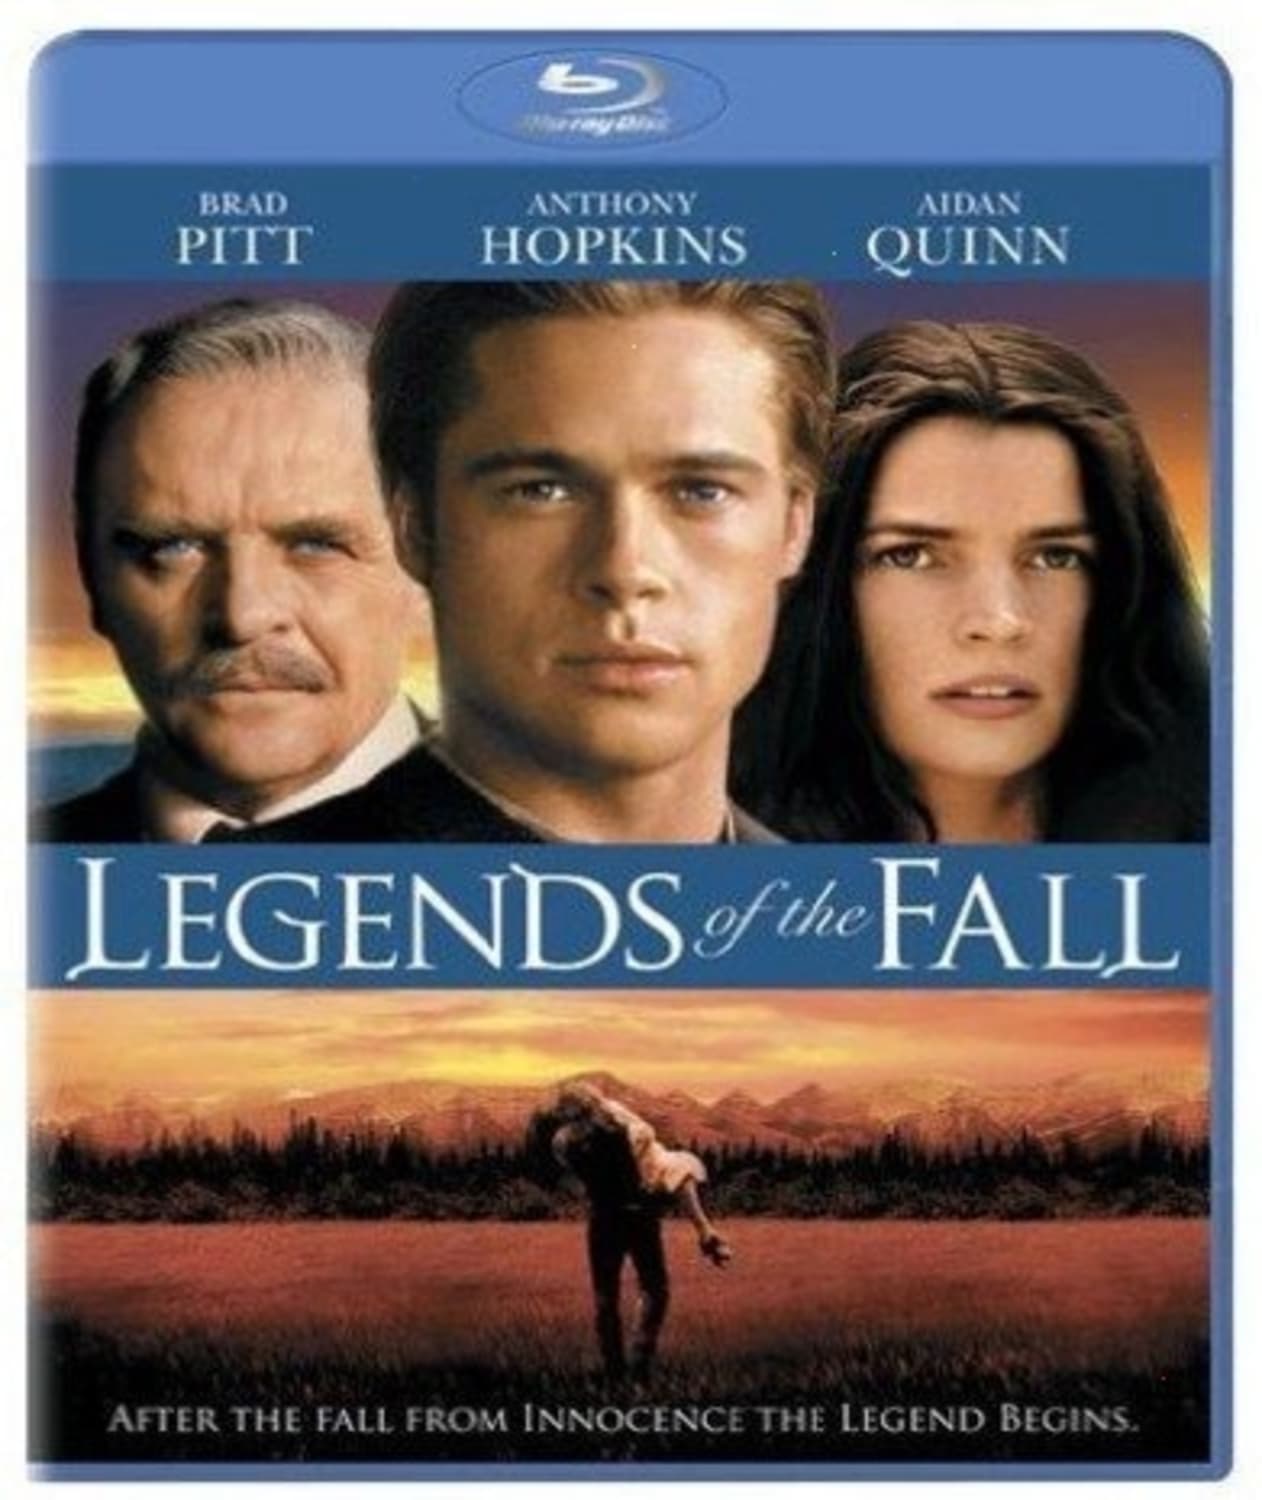 Legends of the Fall (Blu-ray) on MovieShack